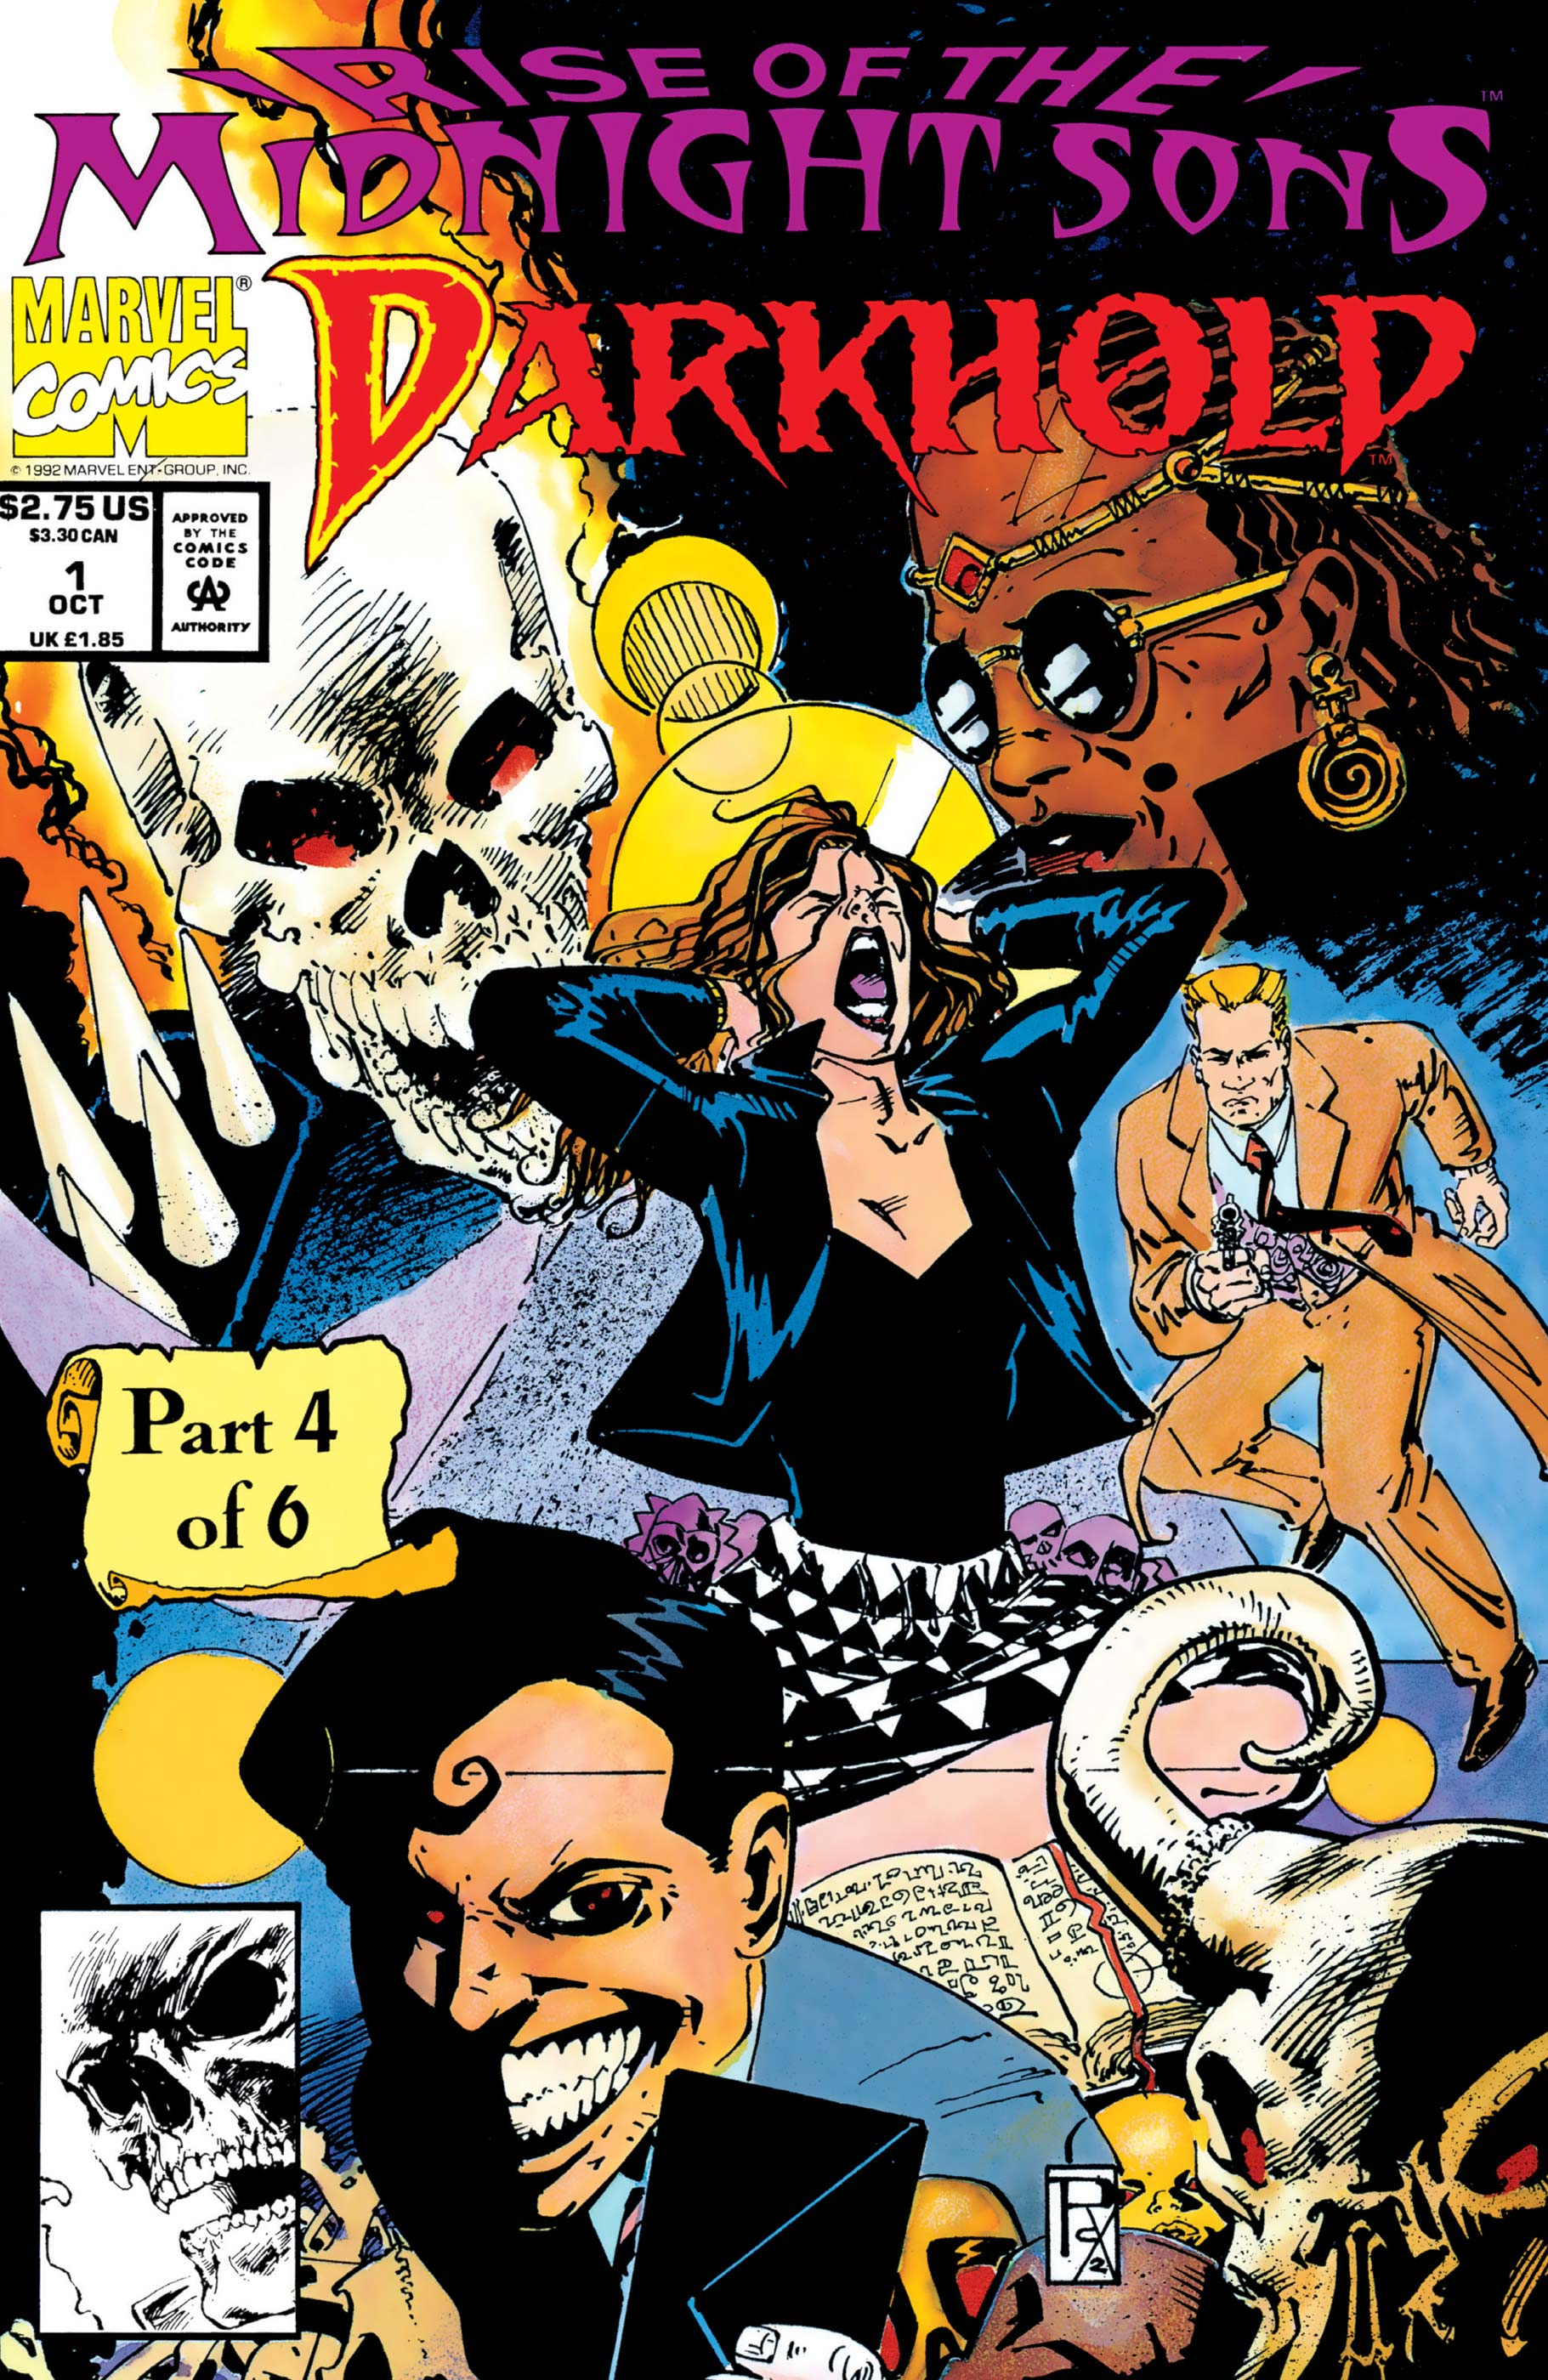 Darkhold: Pages from the Book of Sins (1992) #1